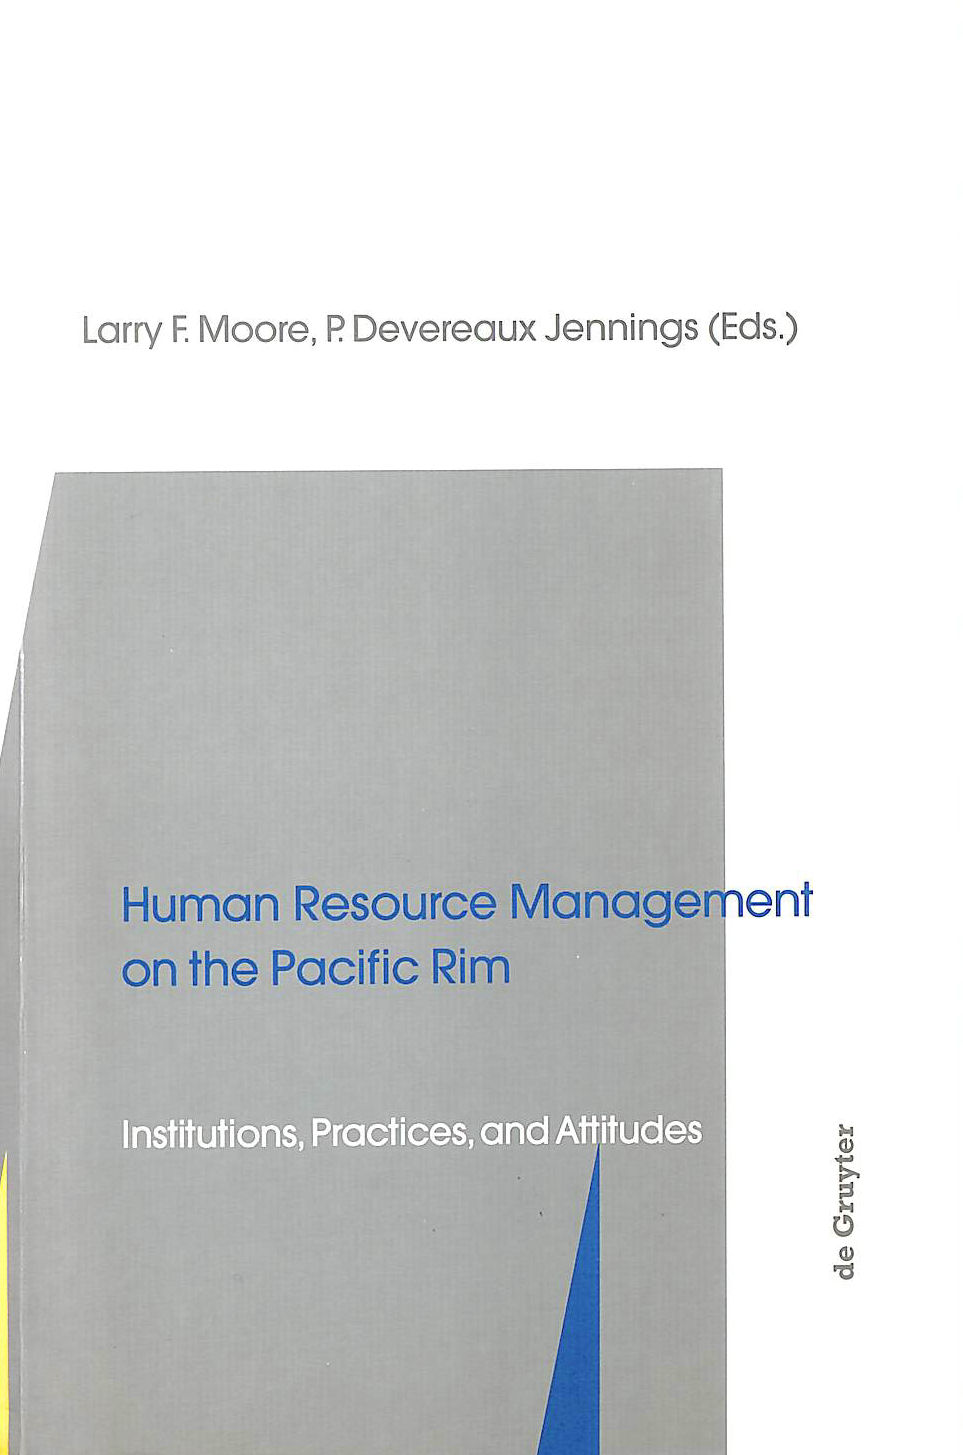  - Human Resource Management on the Pacific Rim: Institutions, Practices, and Attitudes (Degruyter Studies in Organization)